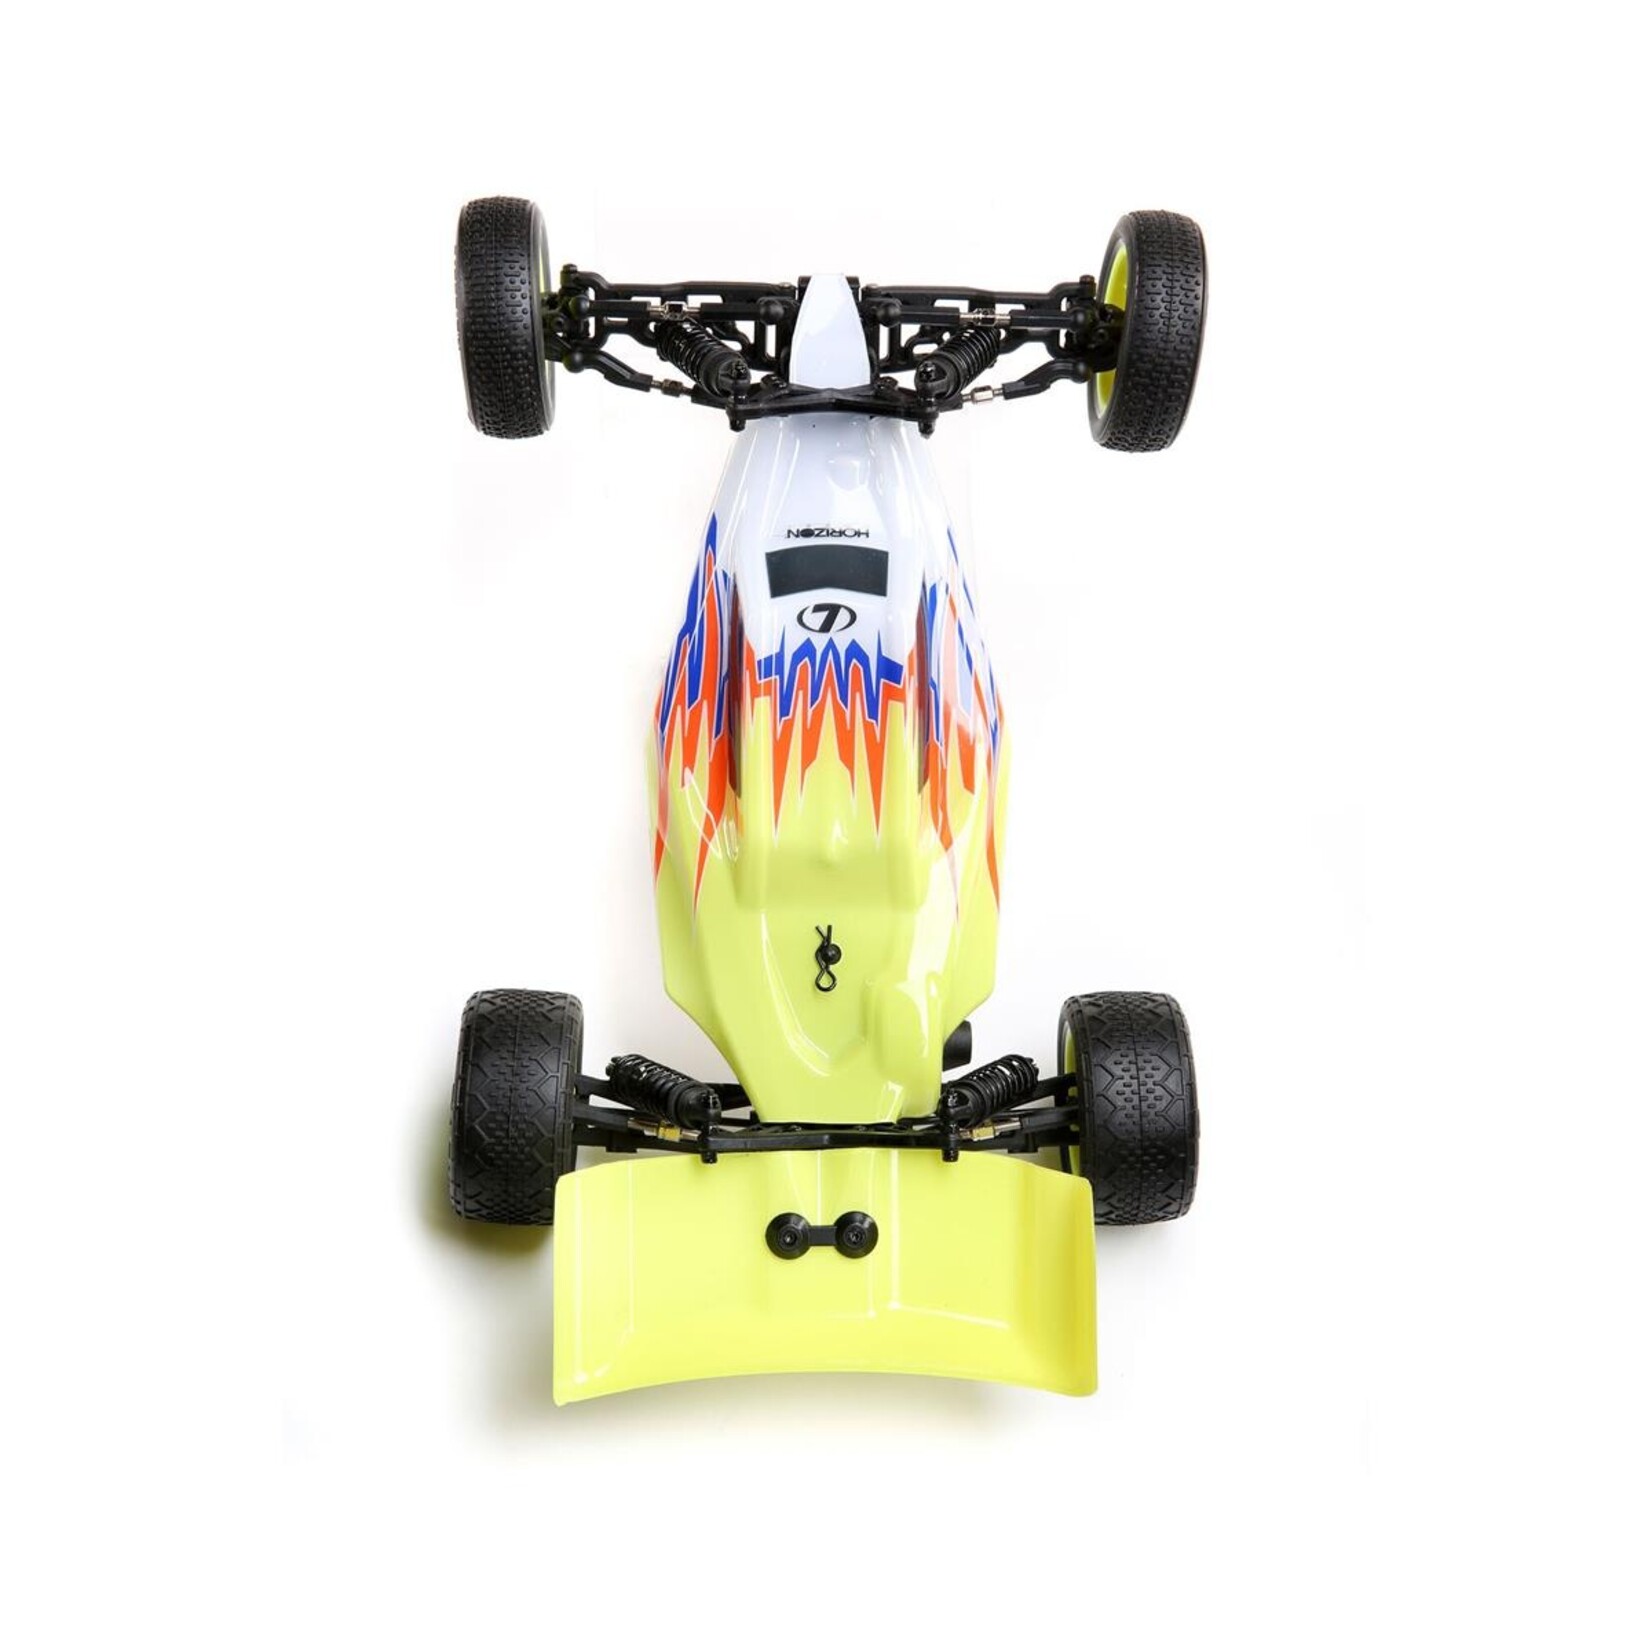 Losi Losi Mini-B 1/16 RTR 2WD Buggy (Yellow) w/2.4GHz Radio, Battery & Charger #LOS01016T3